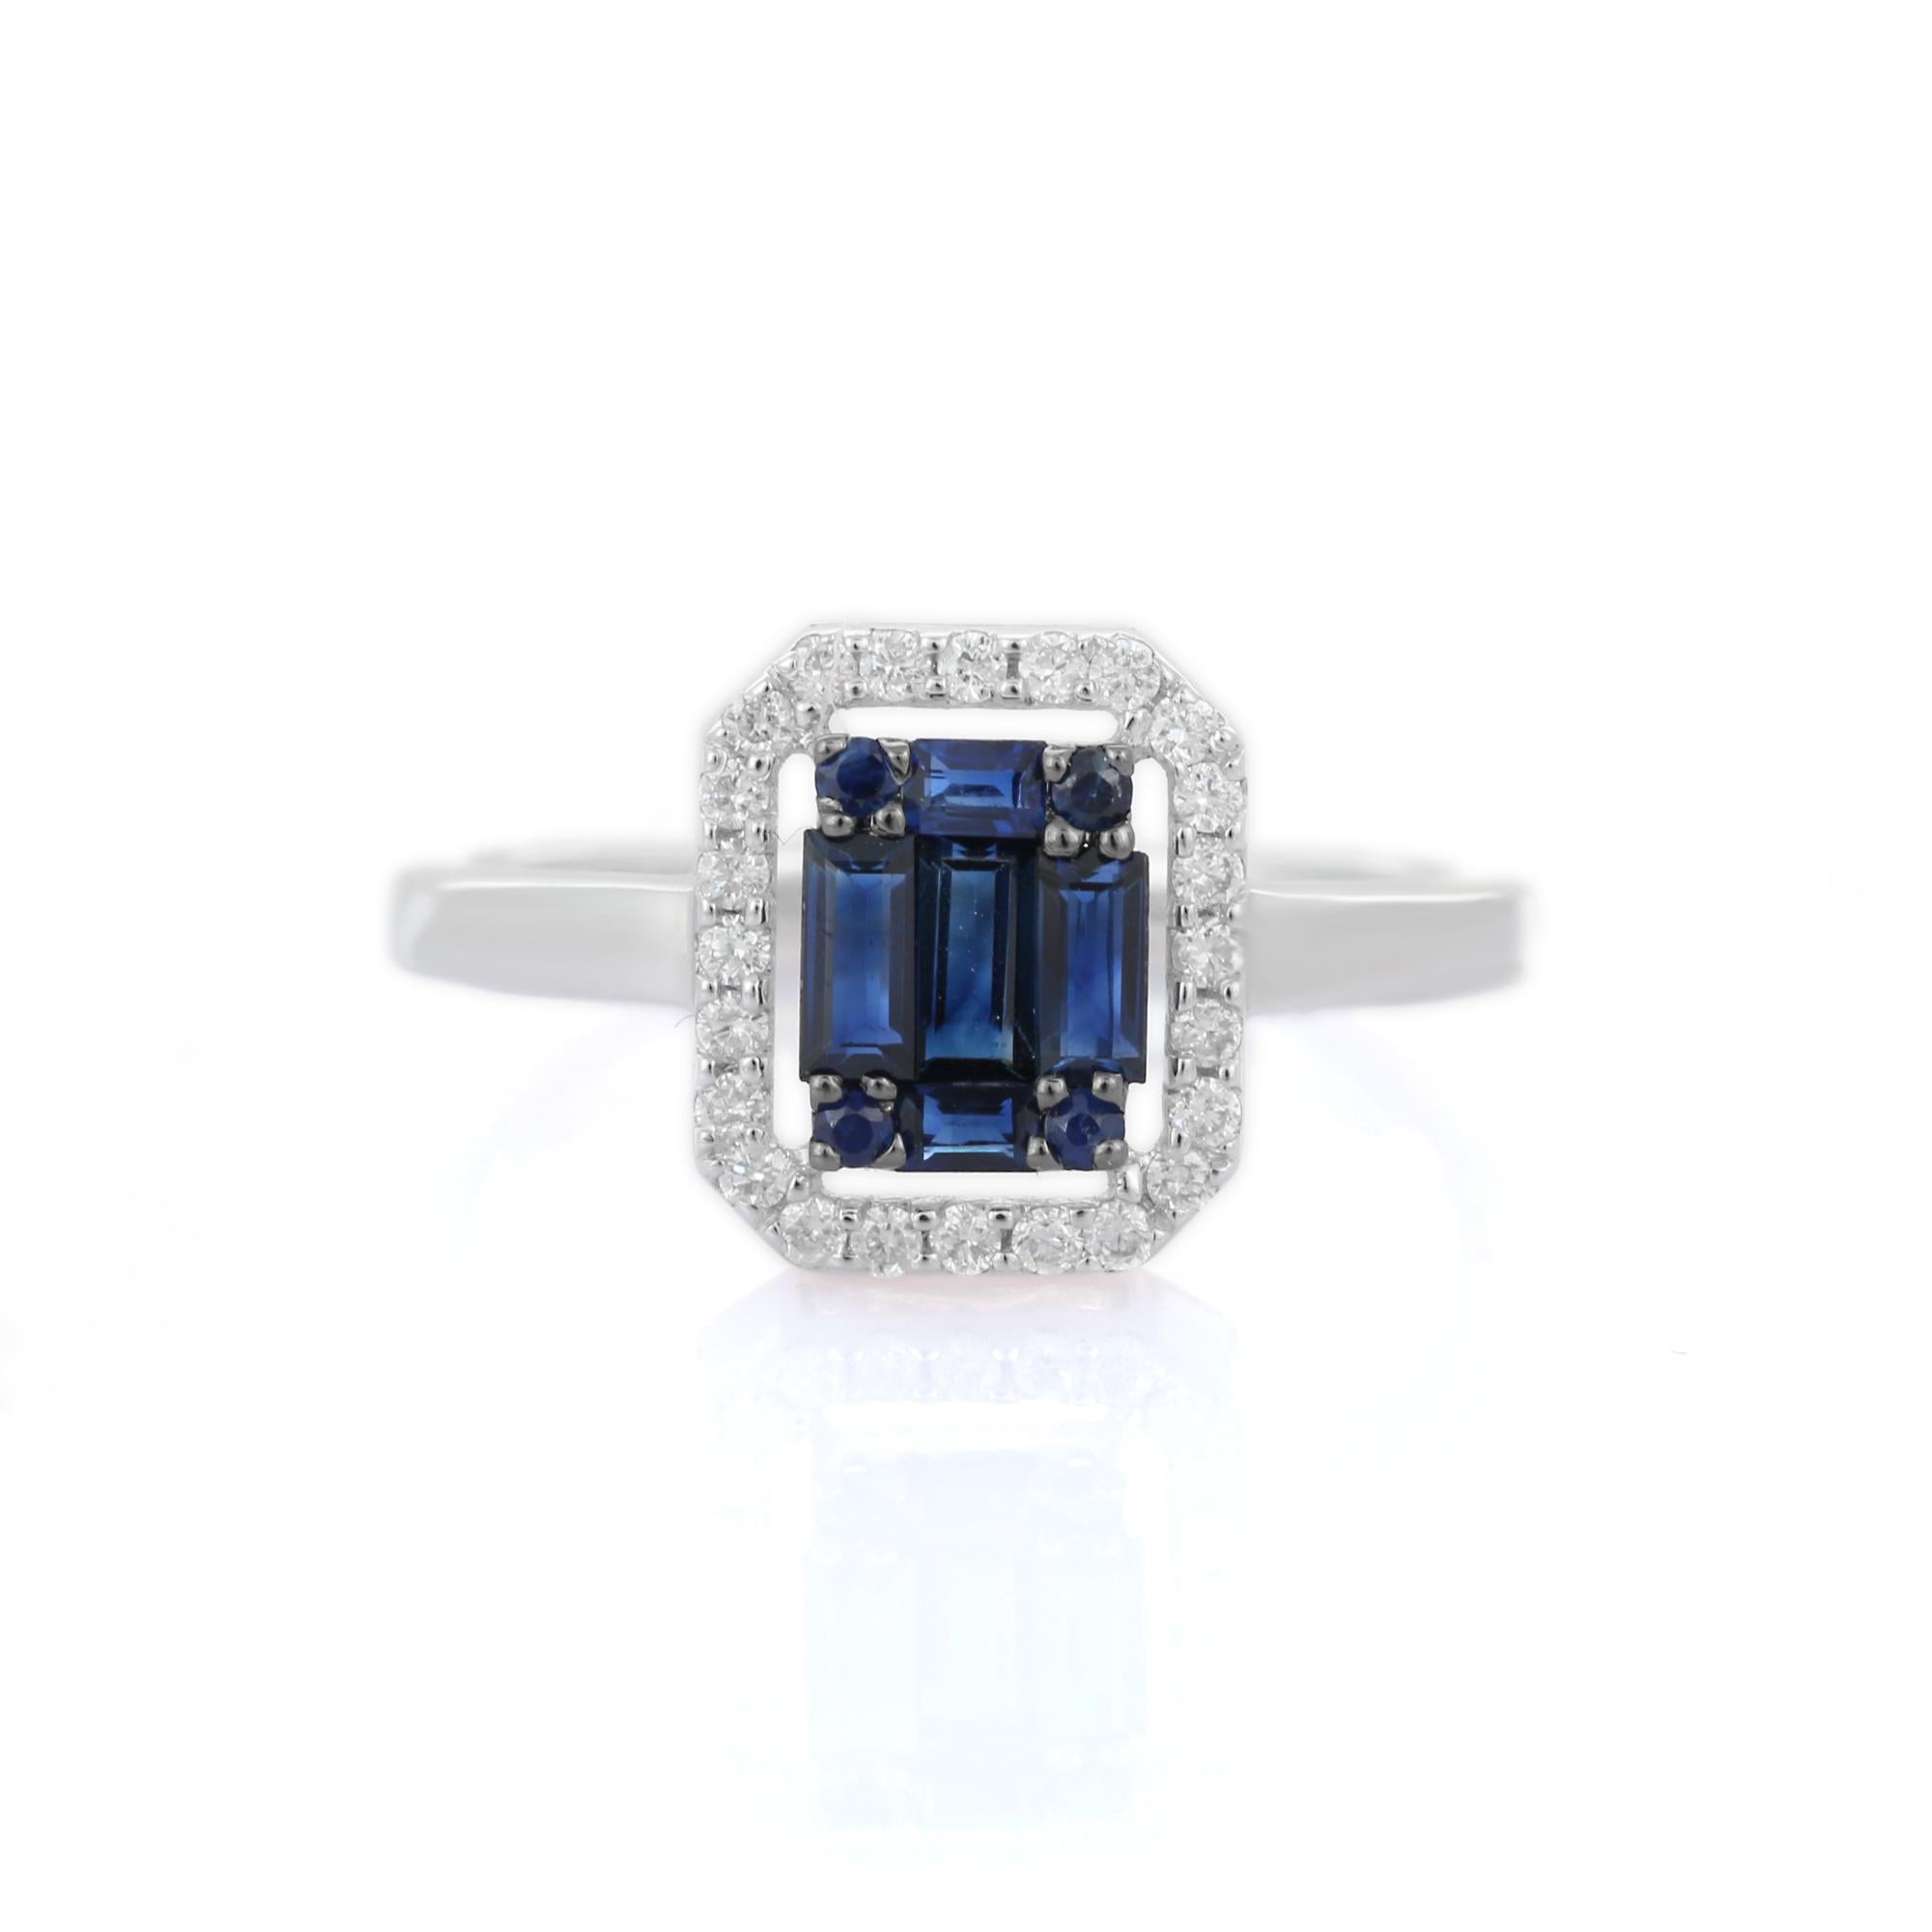 For Sale:  Exquisite Halo Diamond and Sapphire Cluster Ring Studded in 18K White Gold 2